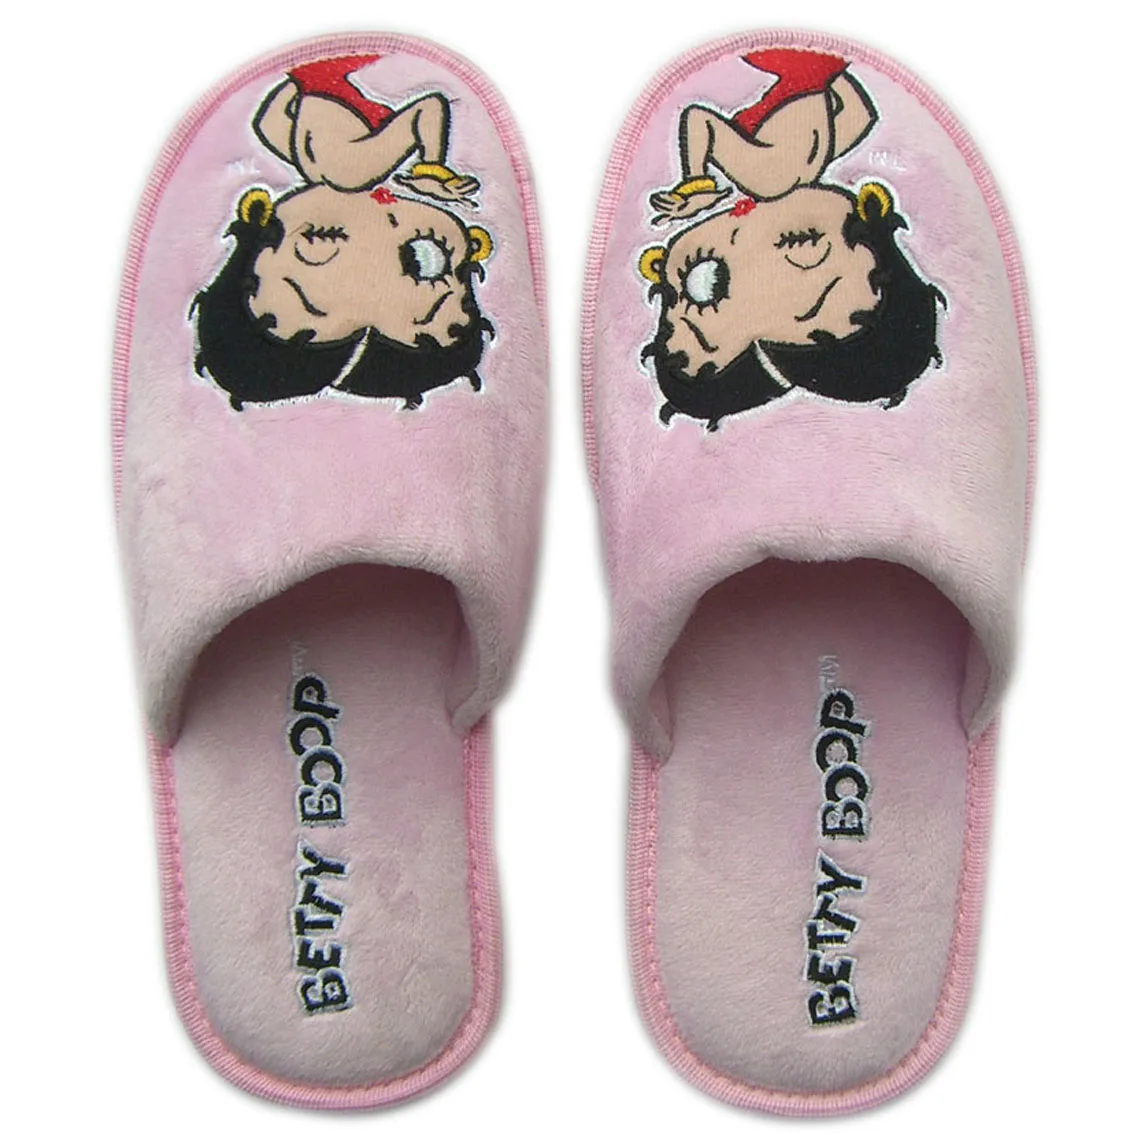 Cute Girl Embroidery Indoor Baby Slippers - Buy Baby Slippers,Baby ...